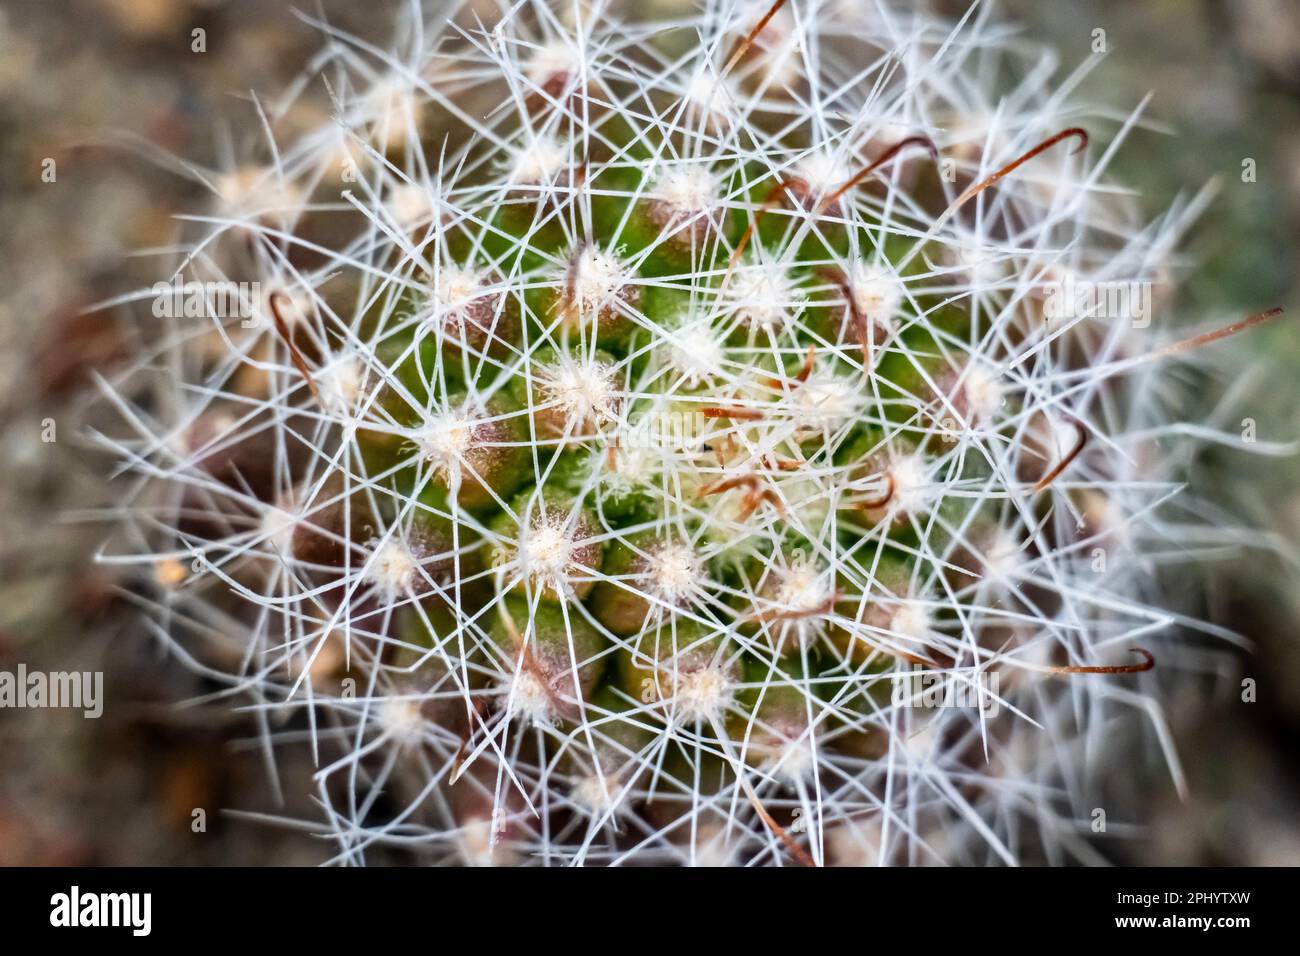 Macro view of cactus plant isolated on bllured background. Stock Photo